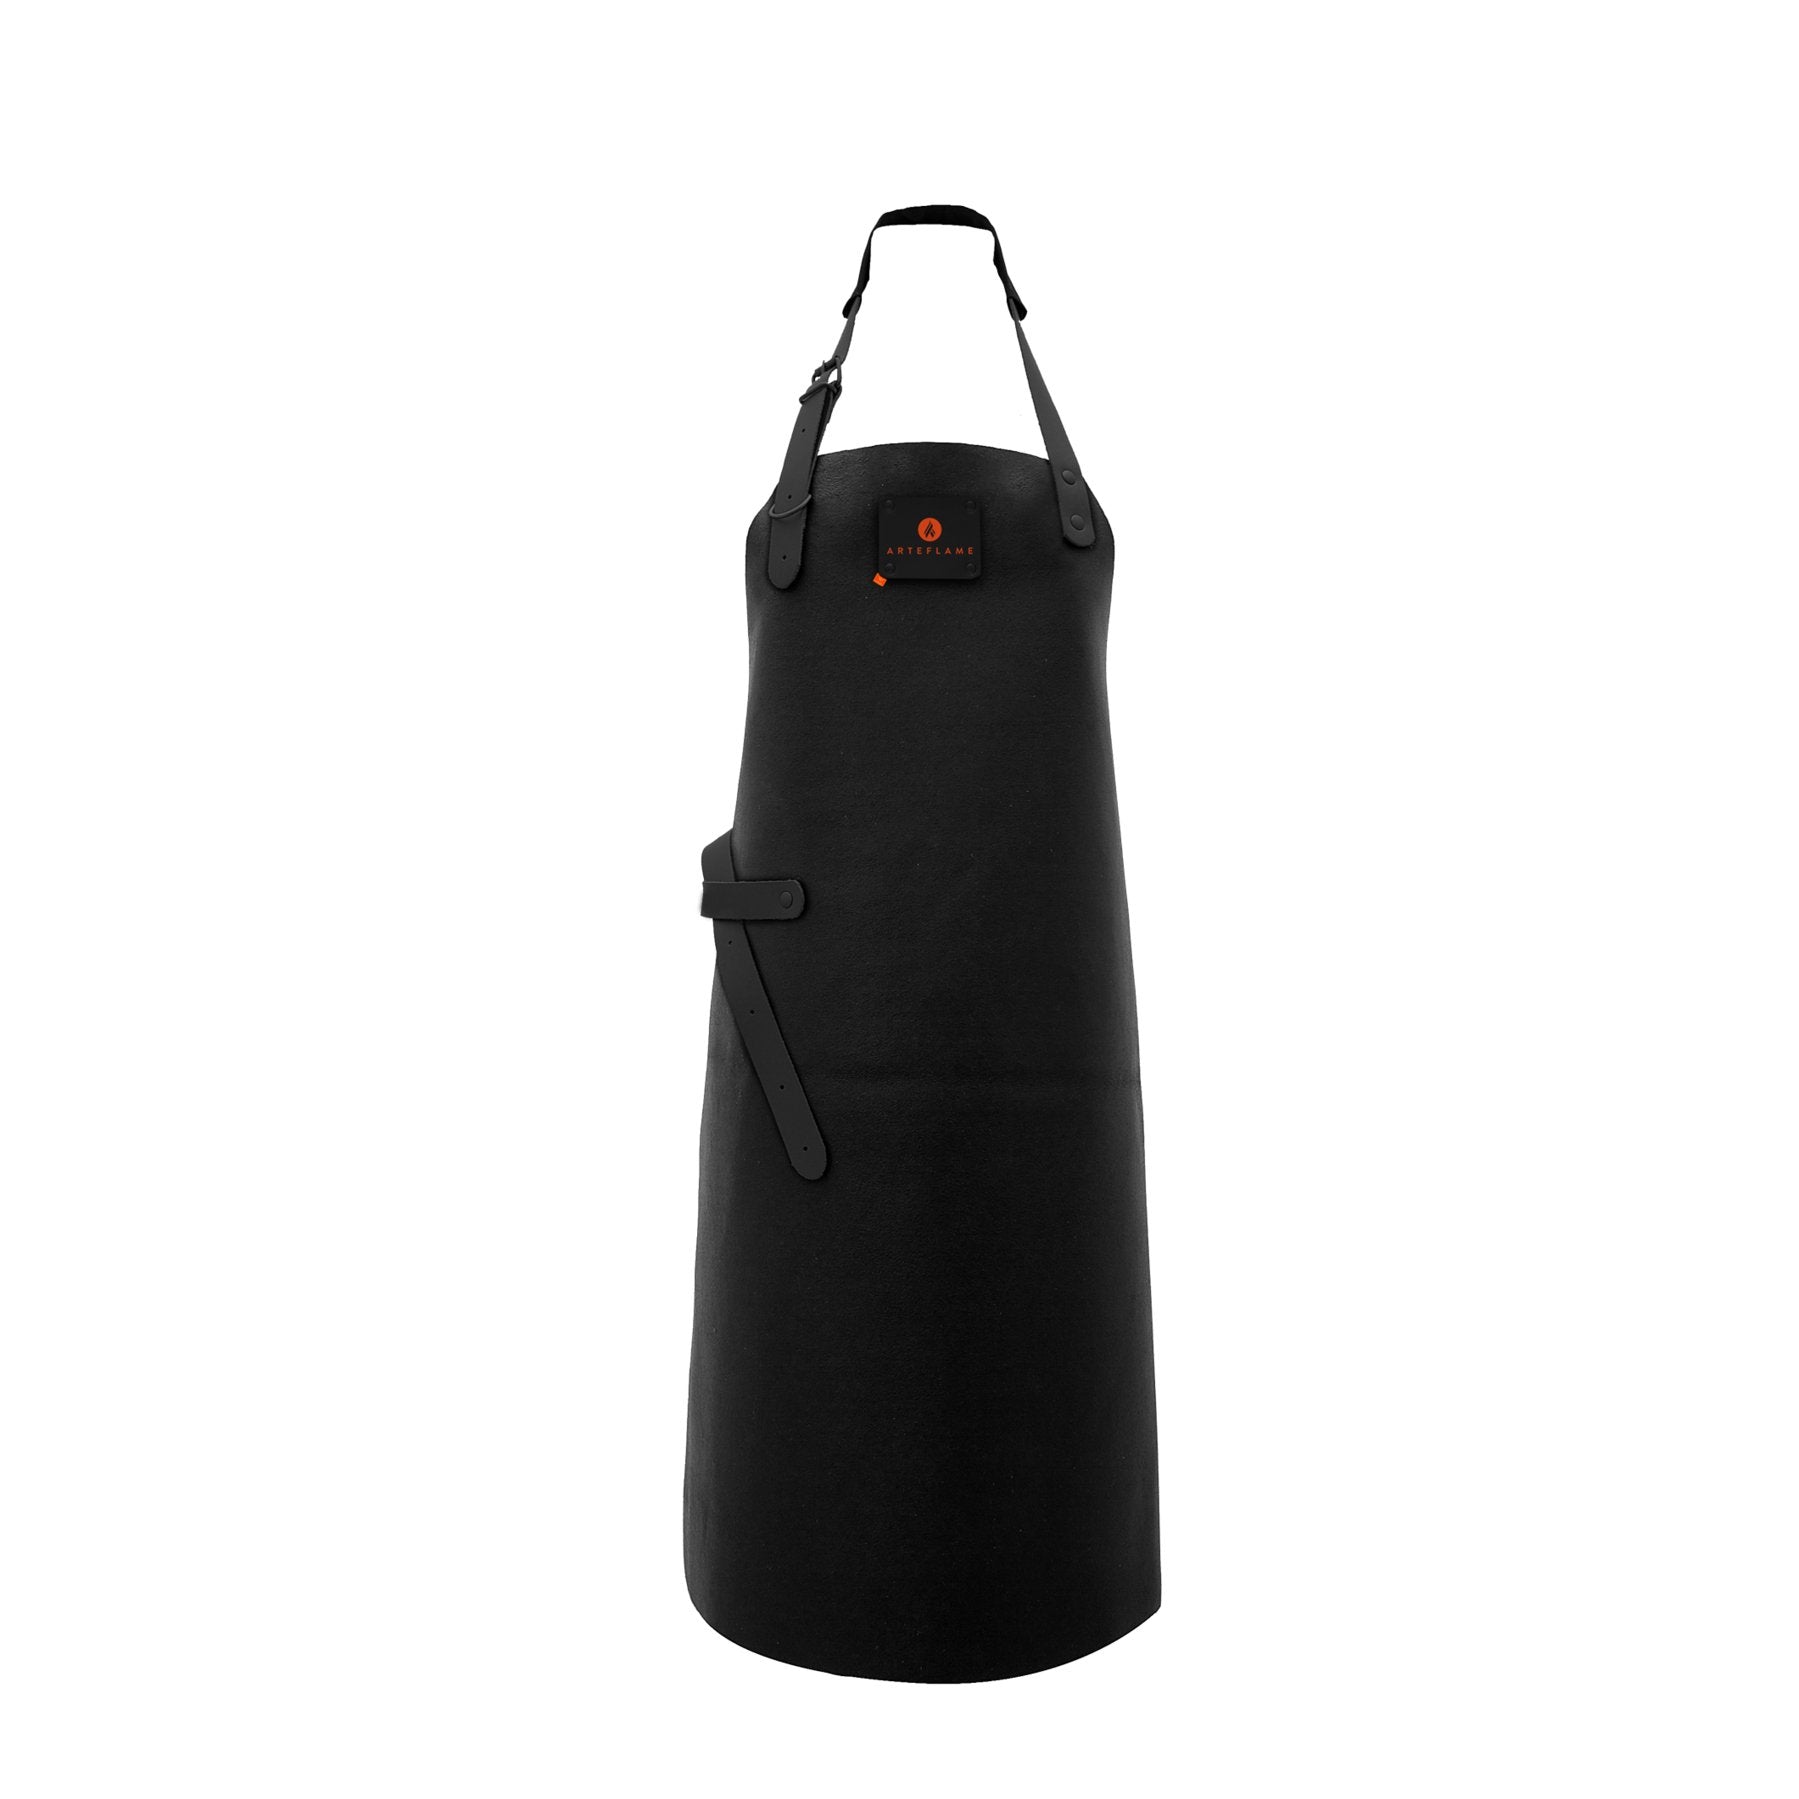 Arteflame Grill Apron Accessories Arteflame 